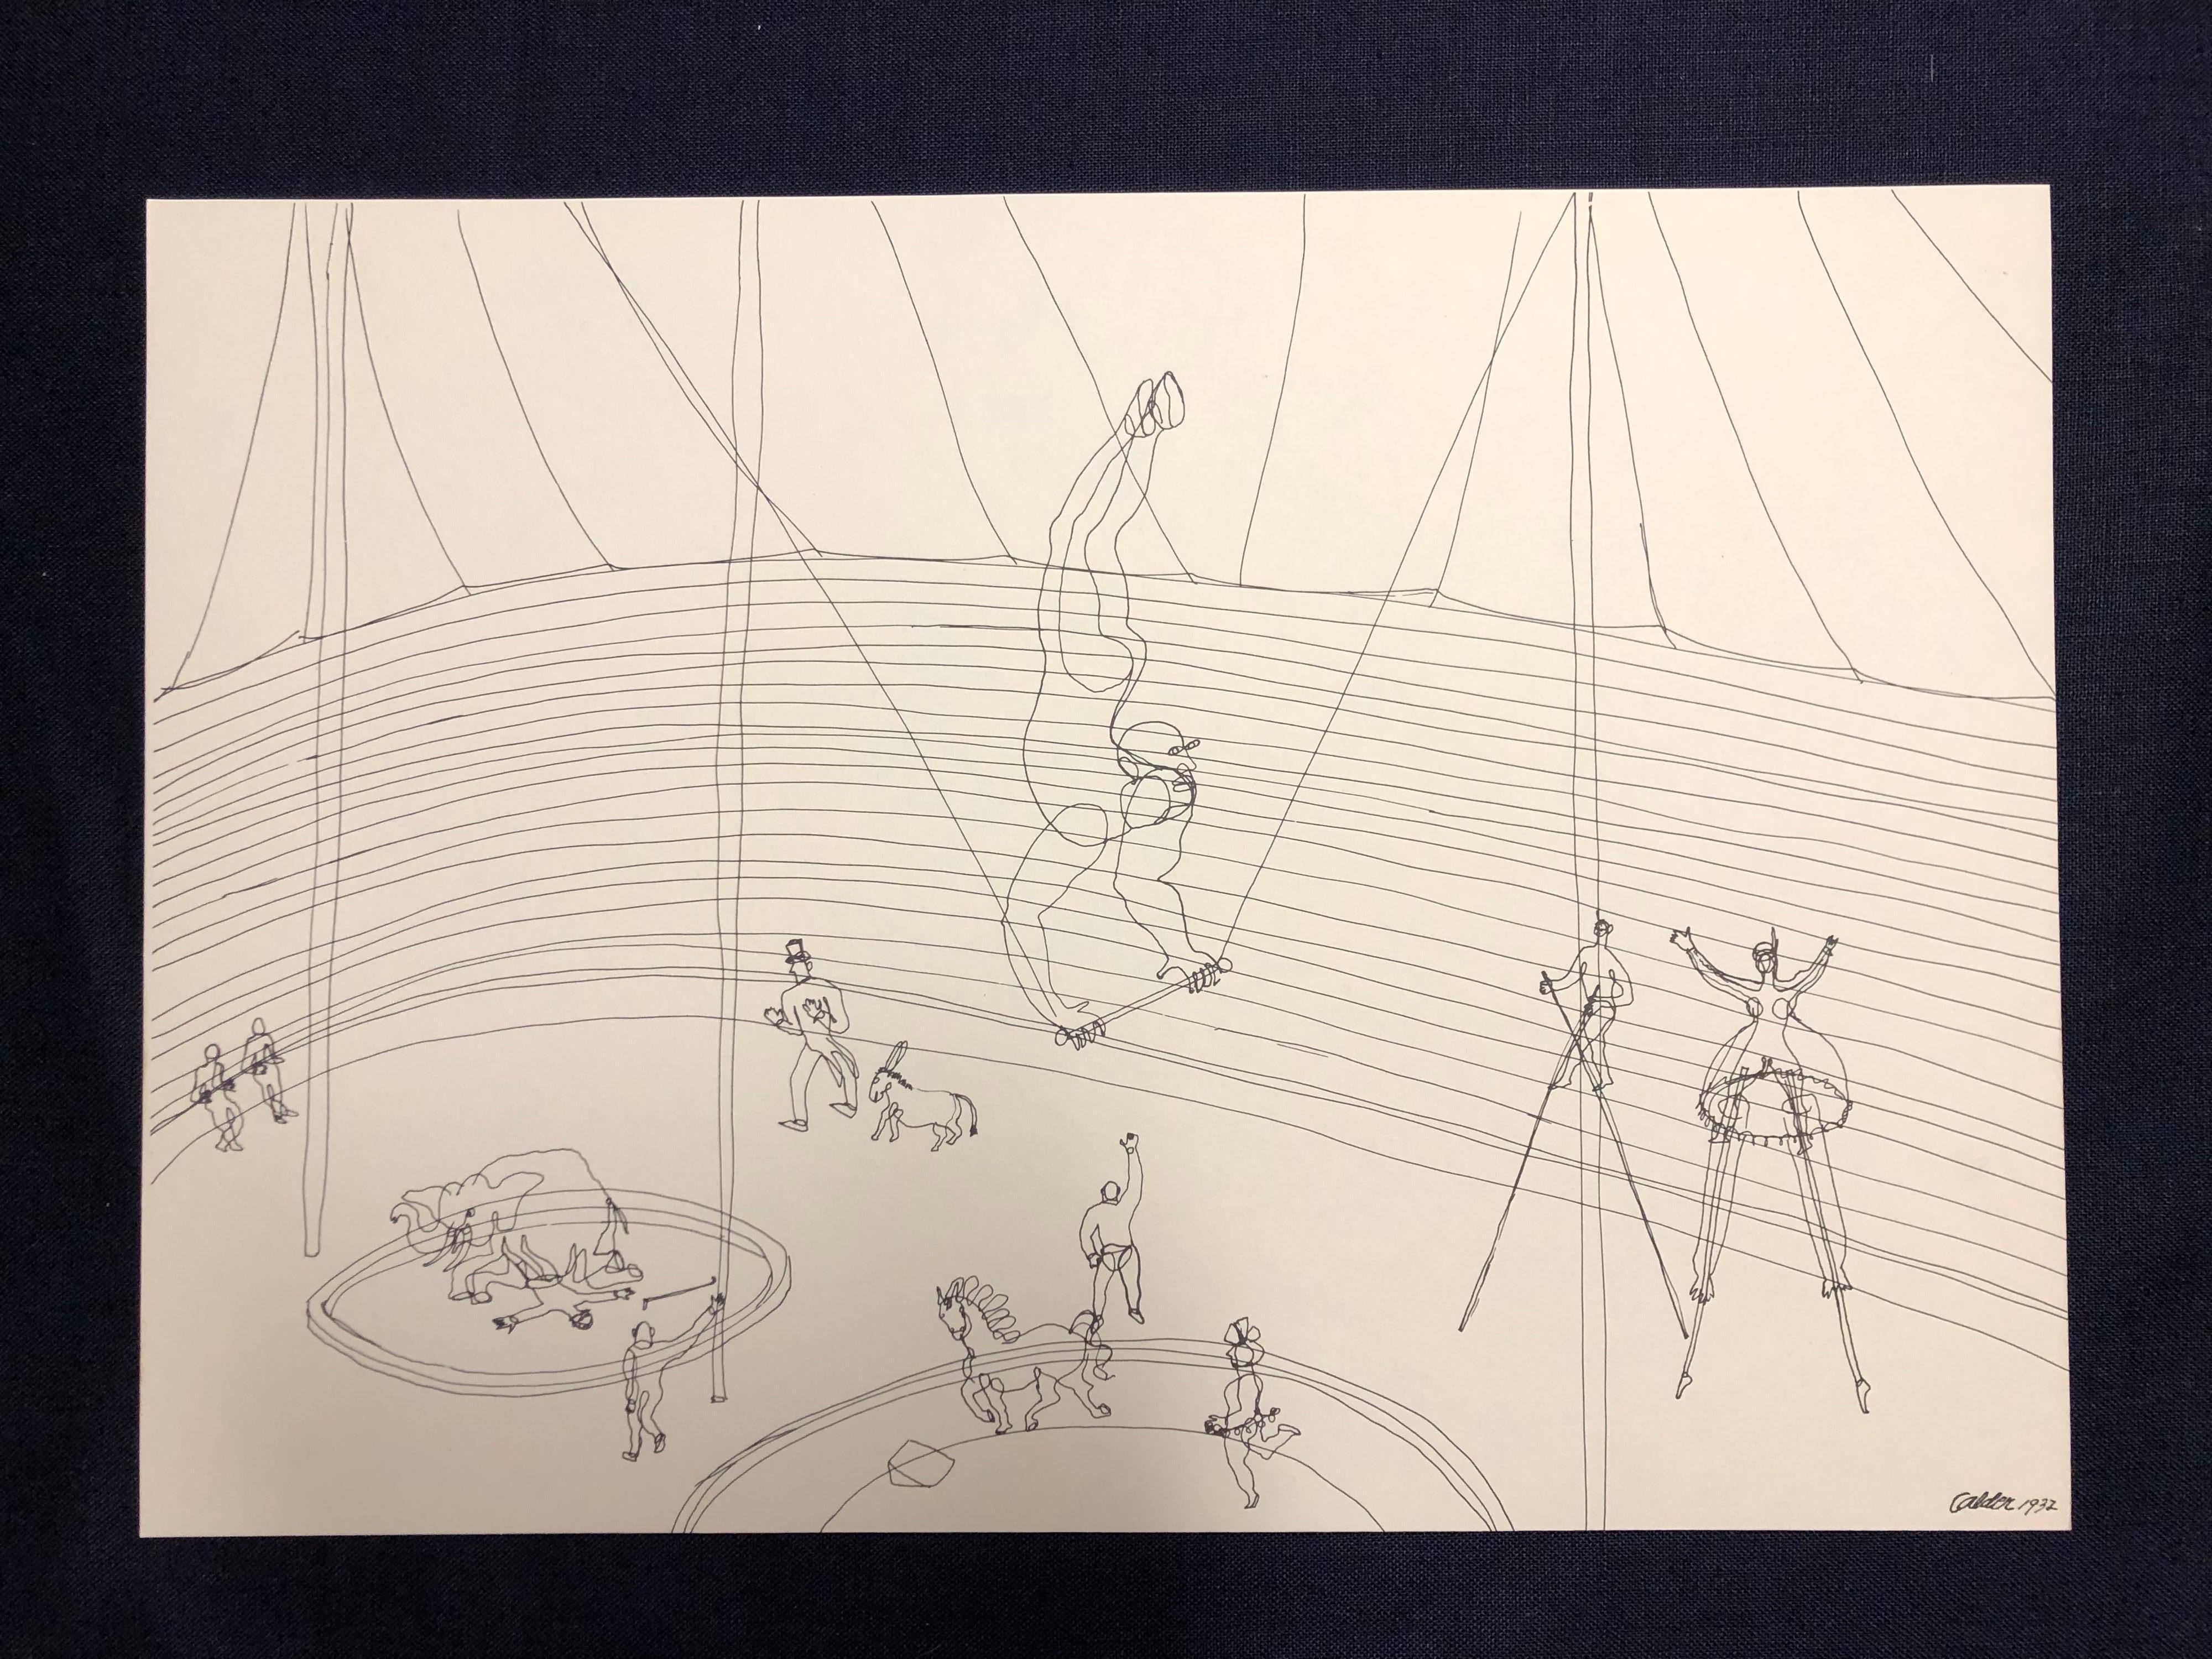 Calder Circus, Complete Set of 16 Lithographs After the Original Drawings 13